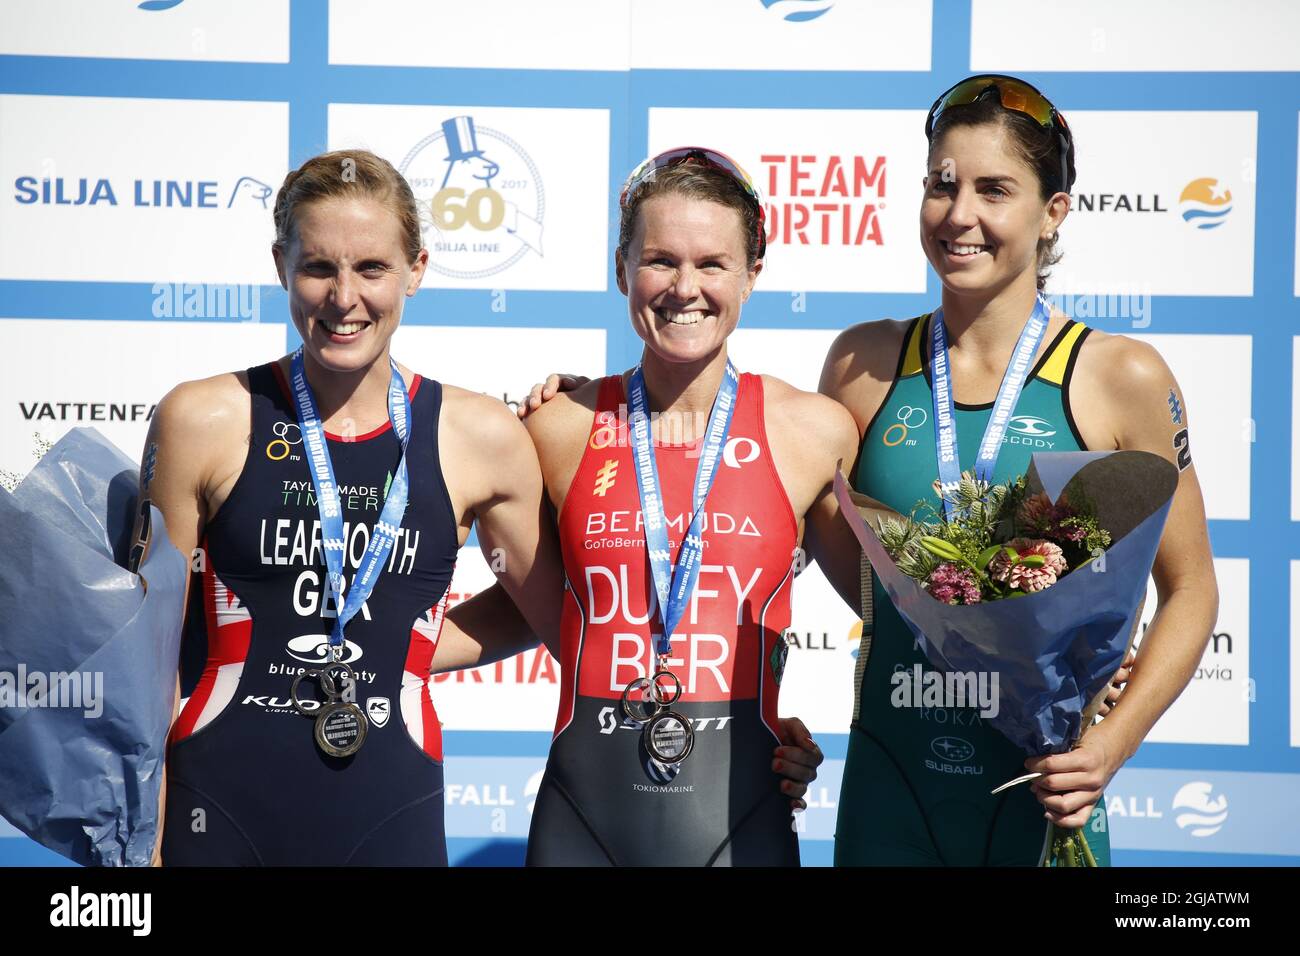 STOCKHOLM 2017-08-26 Jessica Learmonth, United Kingdom, Flora Duffy, Bermuda and Ashleigh Gentle, Australia pose with their medals after the women's triathlon competition in the ITU World Triathlon Series in central Stockholm, Sweden, August 26, 2017. Photo: Christine Olsson / TT / Code 10430  Stock Photo